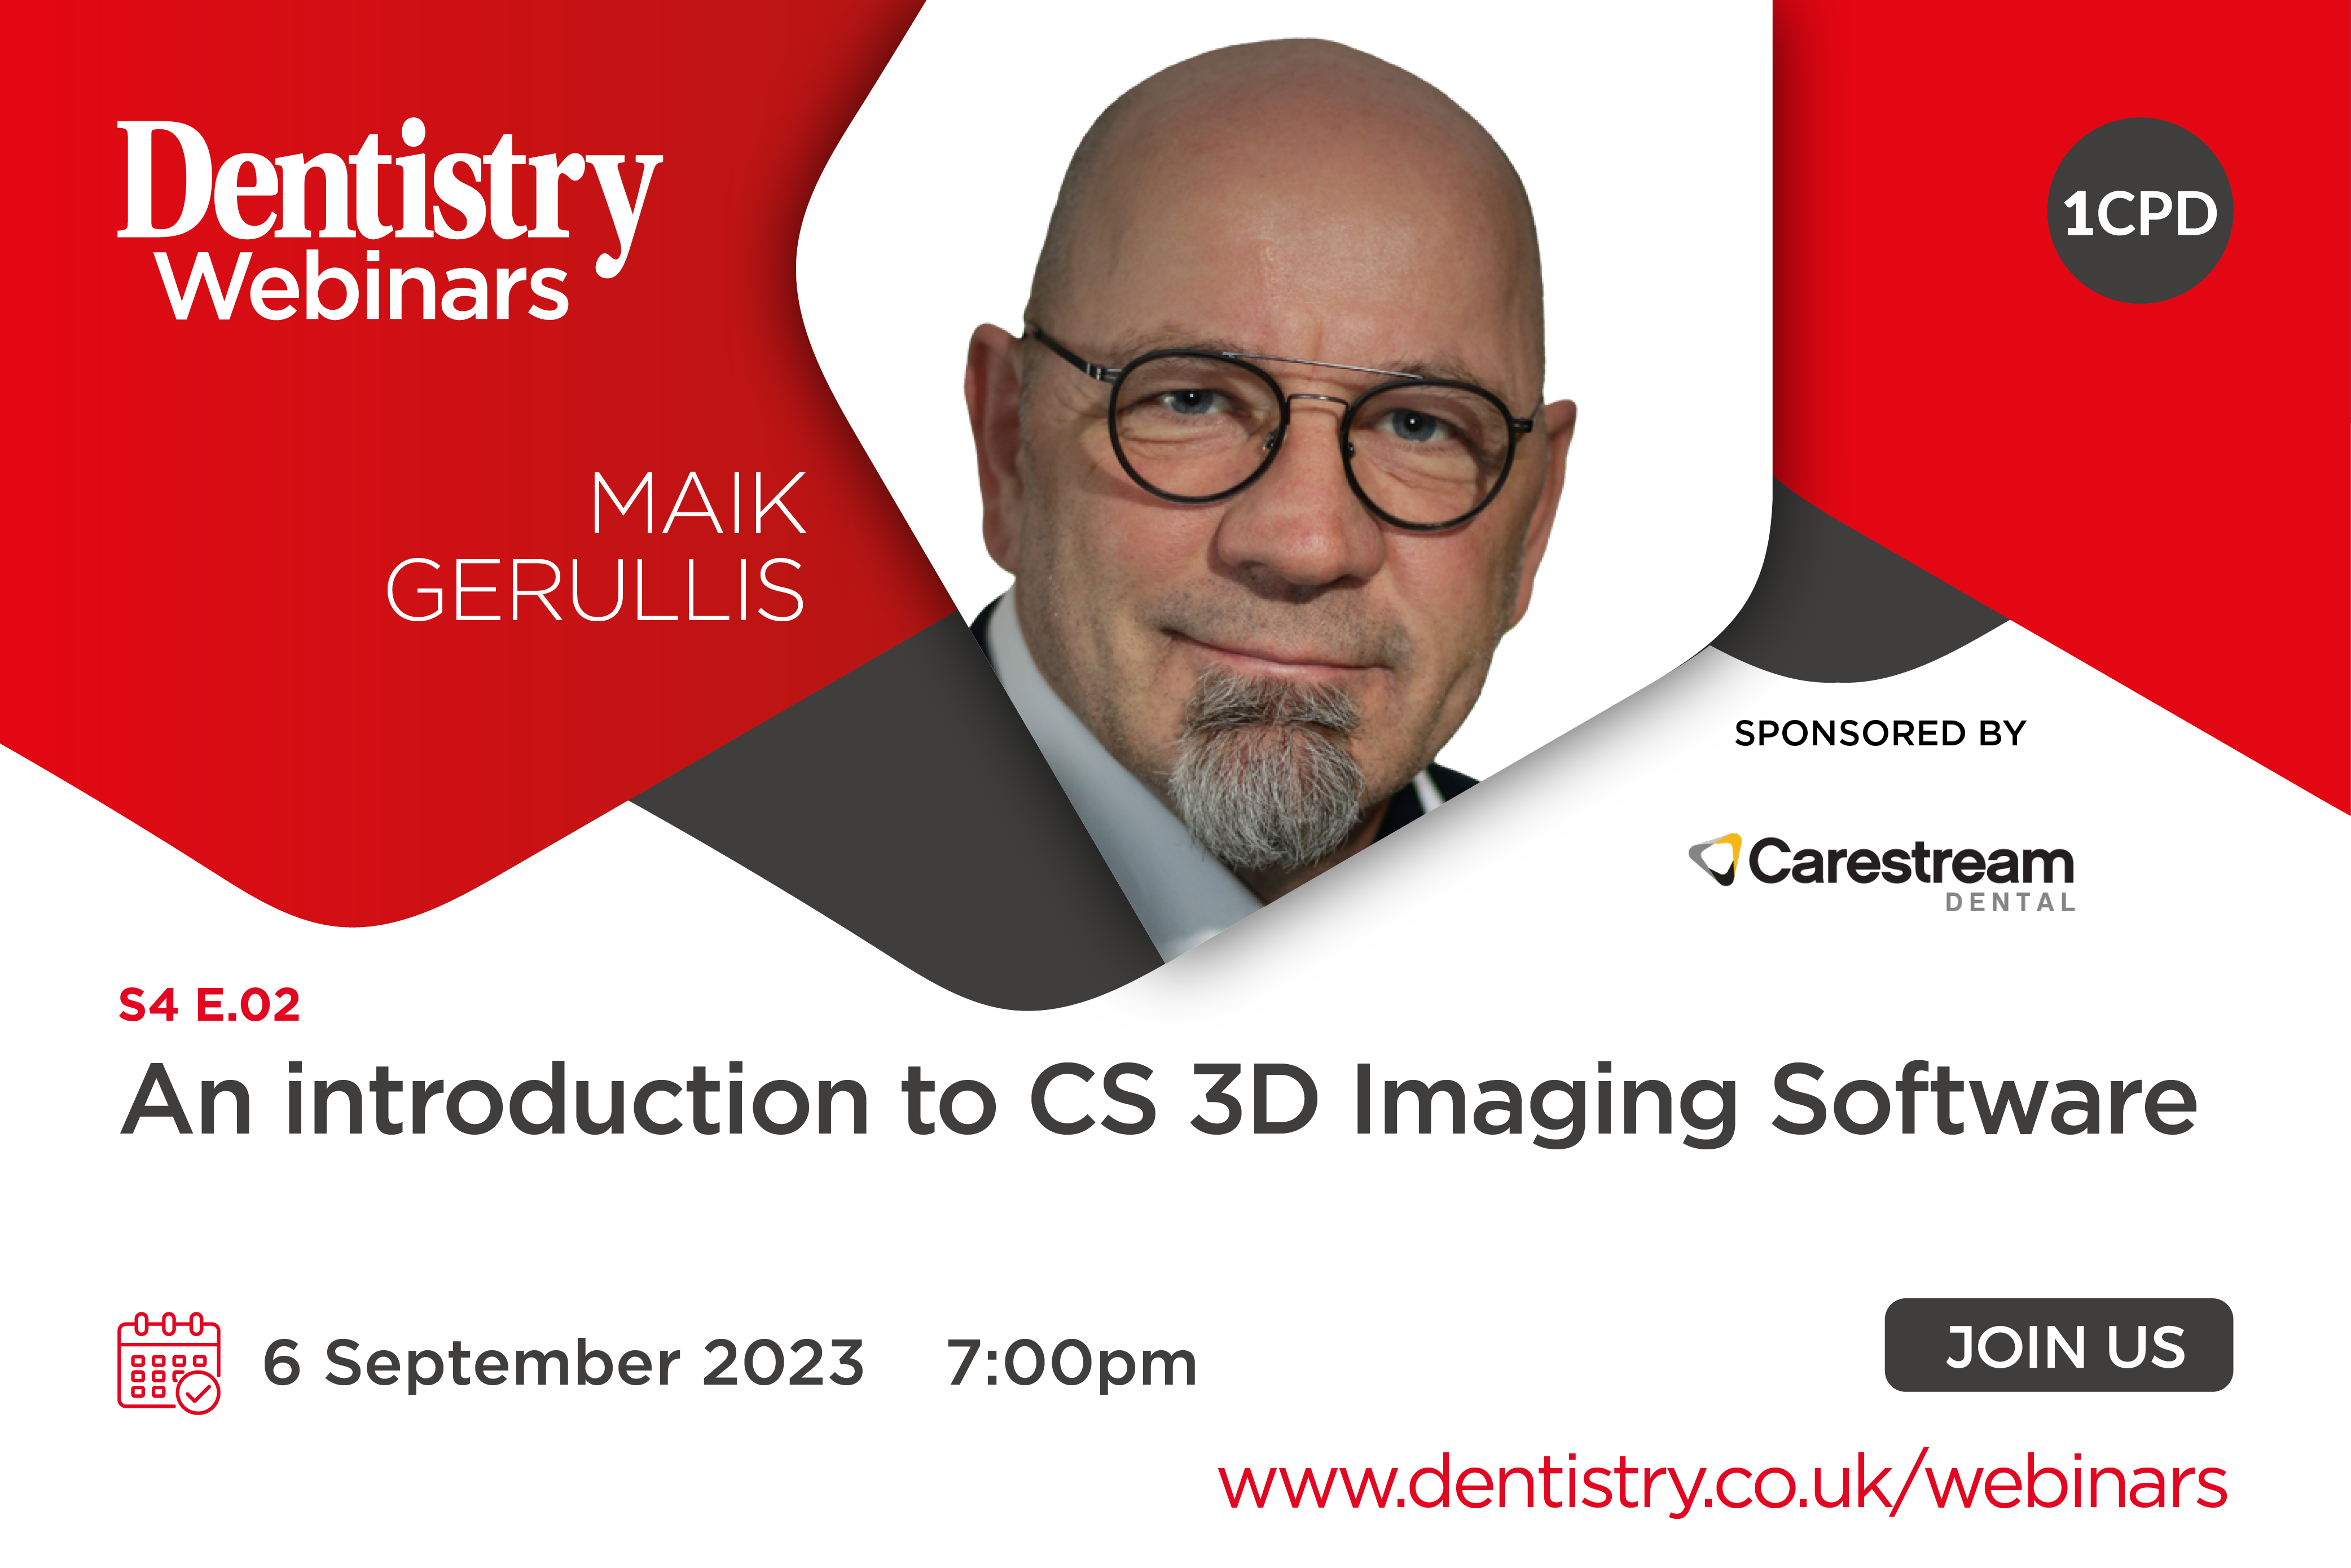 Join Maik Gerullis on Wednesday 6 September at 7pm as he discusses everything you need to know about CS 3D Imaging Software – register now!